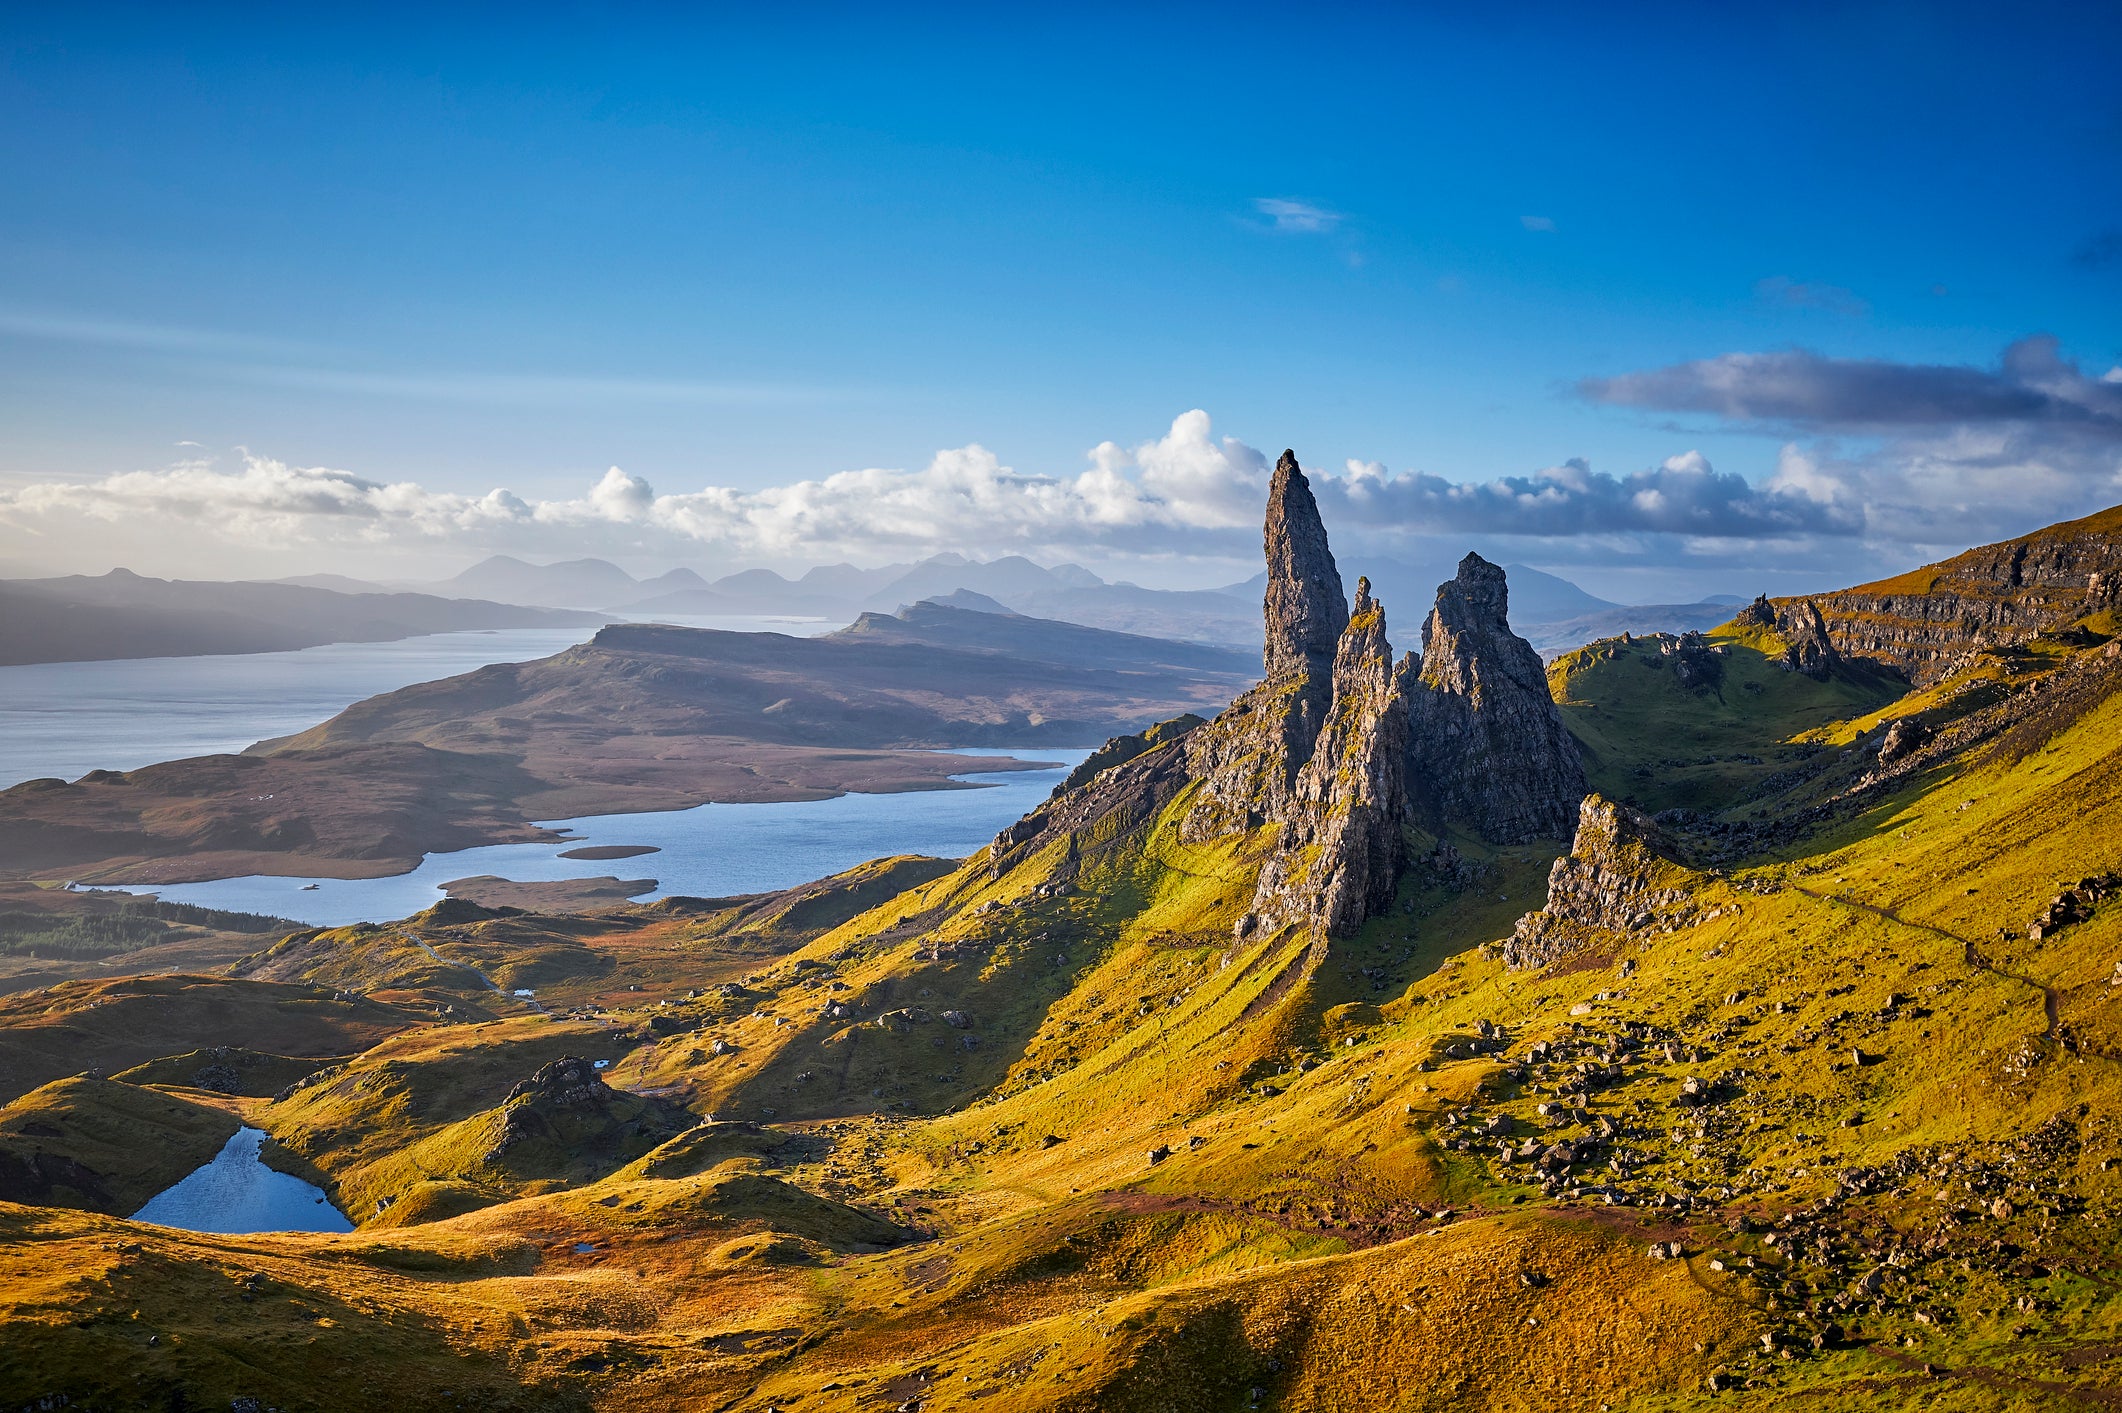 The view over the Old Man of Storr, Isle of Skye, Scotland